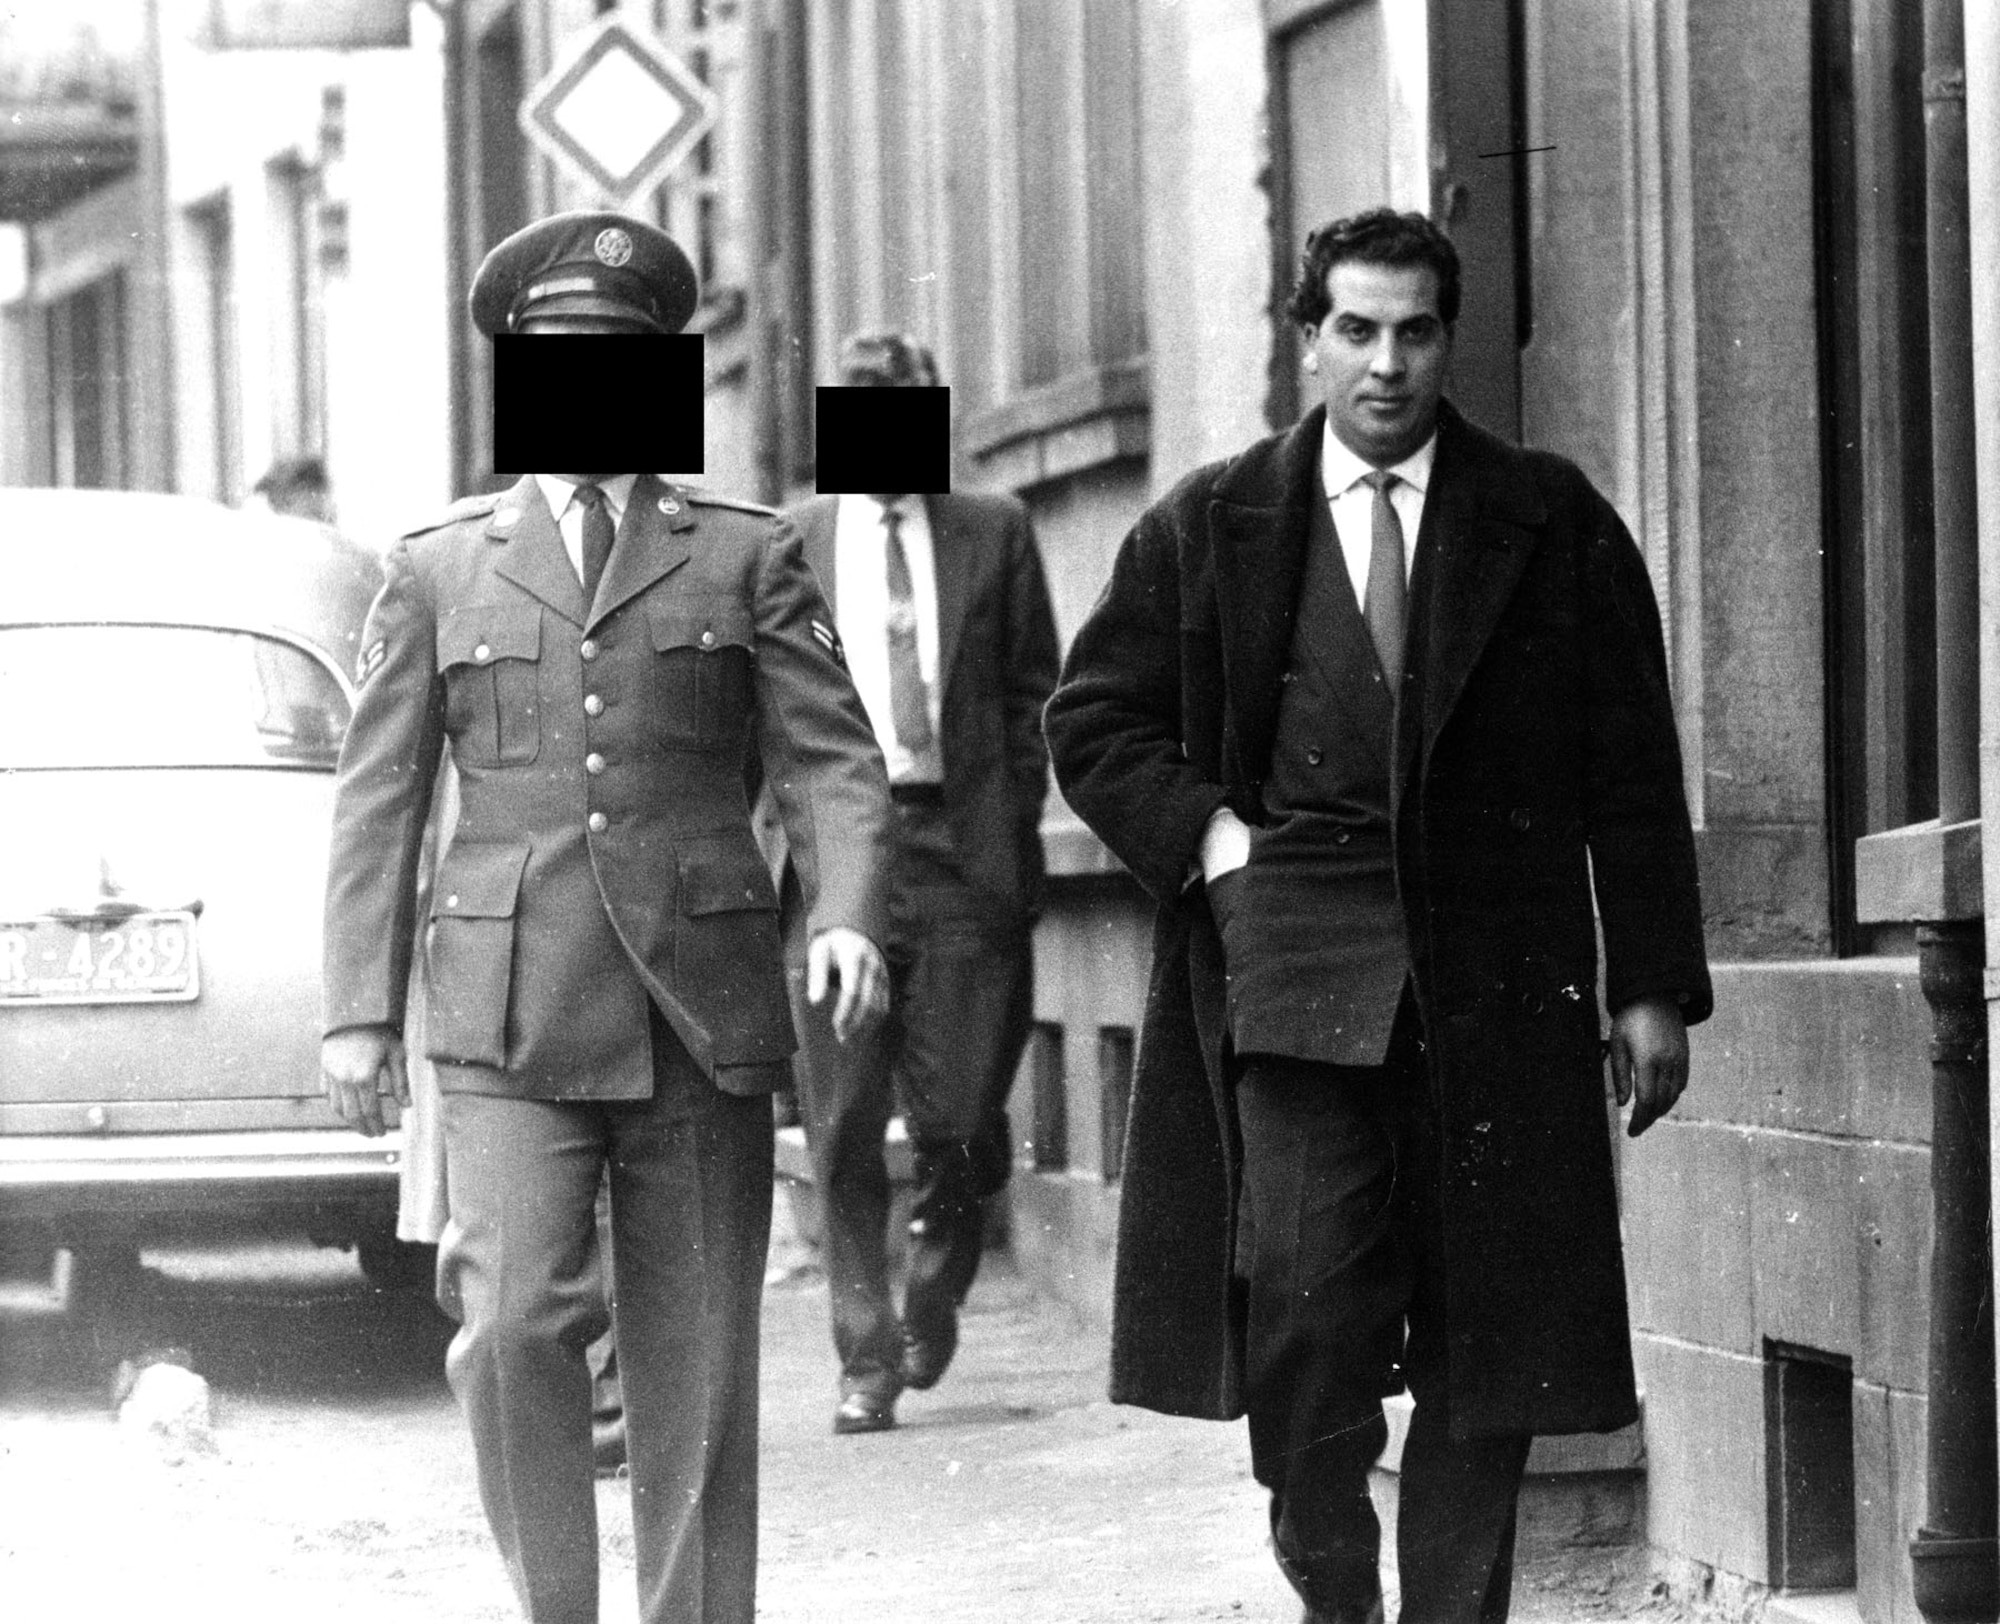 This is a terrorist being watched during the Cold War. The man on the right is an Algerian who claimed to be a member of the Front de la Libération Nationale, or FLN. When he attempted to buy machine guns and pistols from the Airman on the left, near Ramstein Air Base, Germany, in 1959, the Airman alerted OSI. Their meeting was recorded and photographed in an investigation in which OSI cooperated with French and German police. The man in the background is an OSI agent. (U.S. Air Force photo)